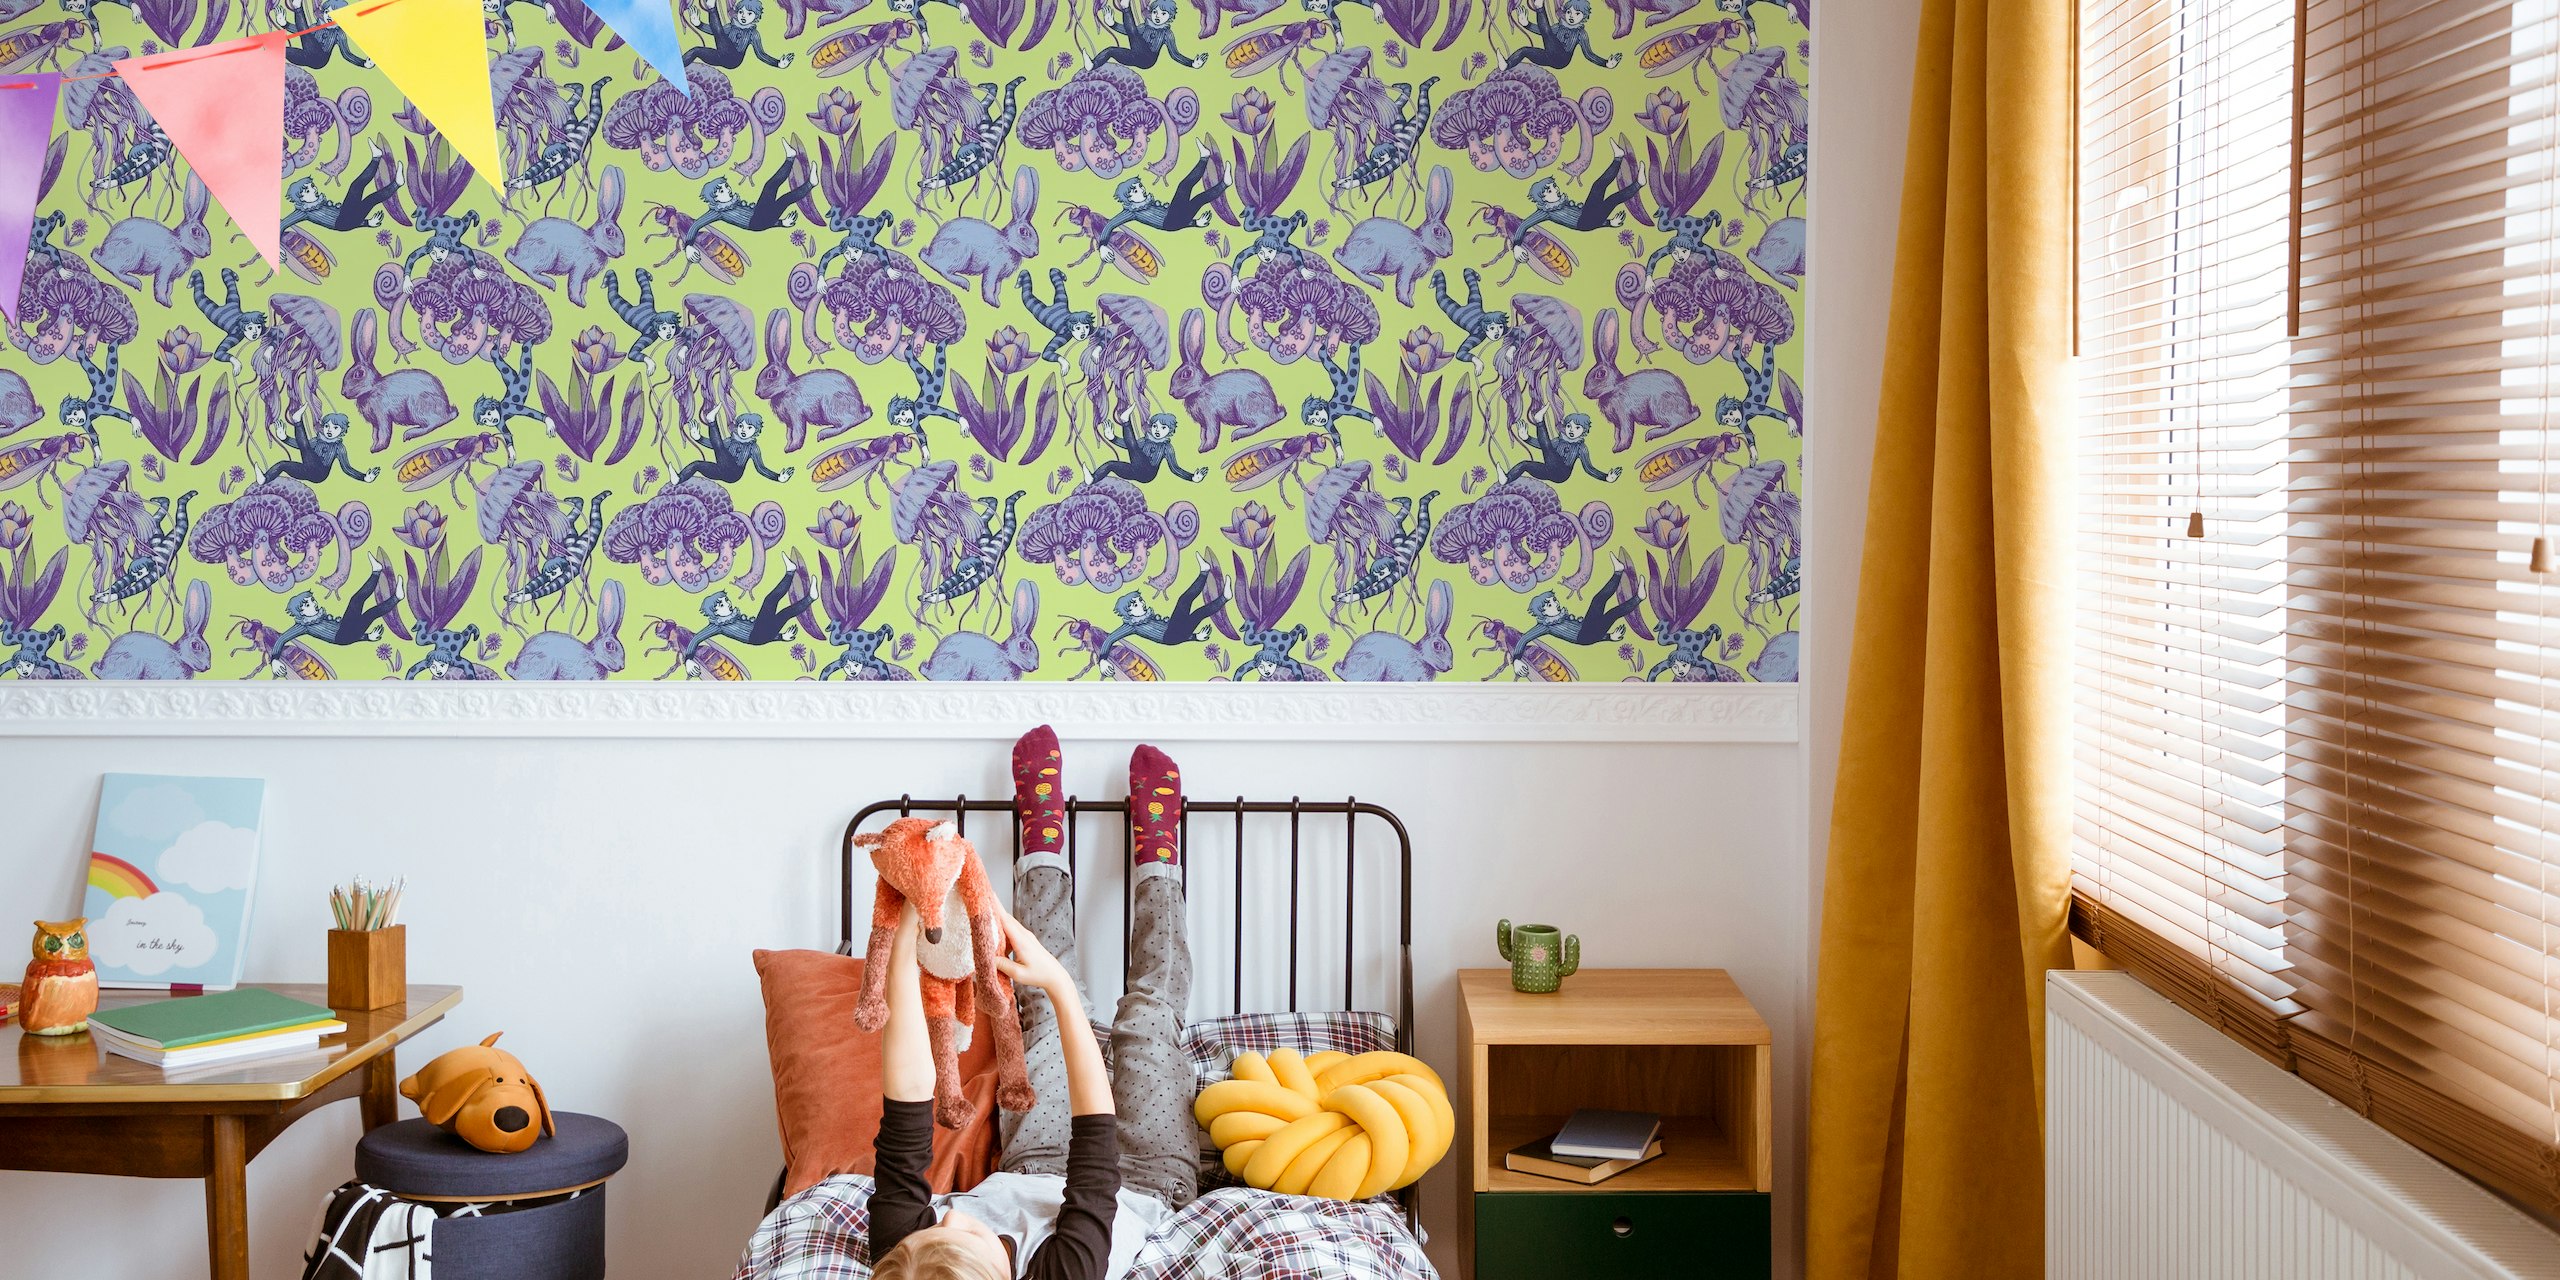 Illustrative wall mural with a boy and playful creatures in a wonderland theme on a pastel background